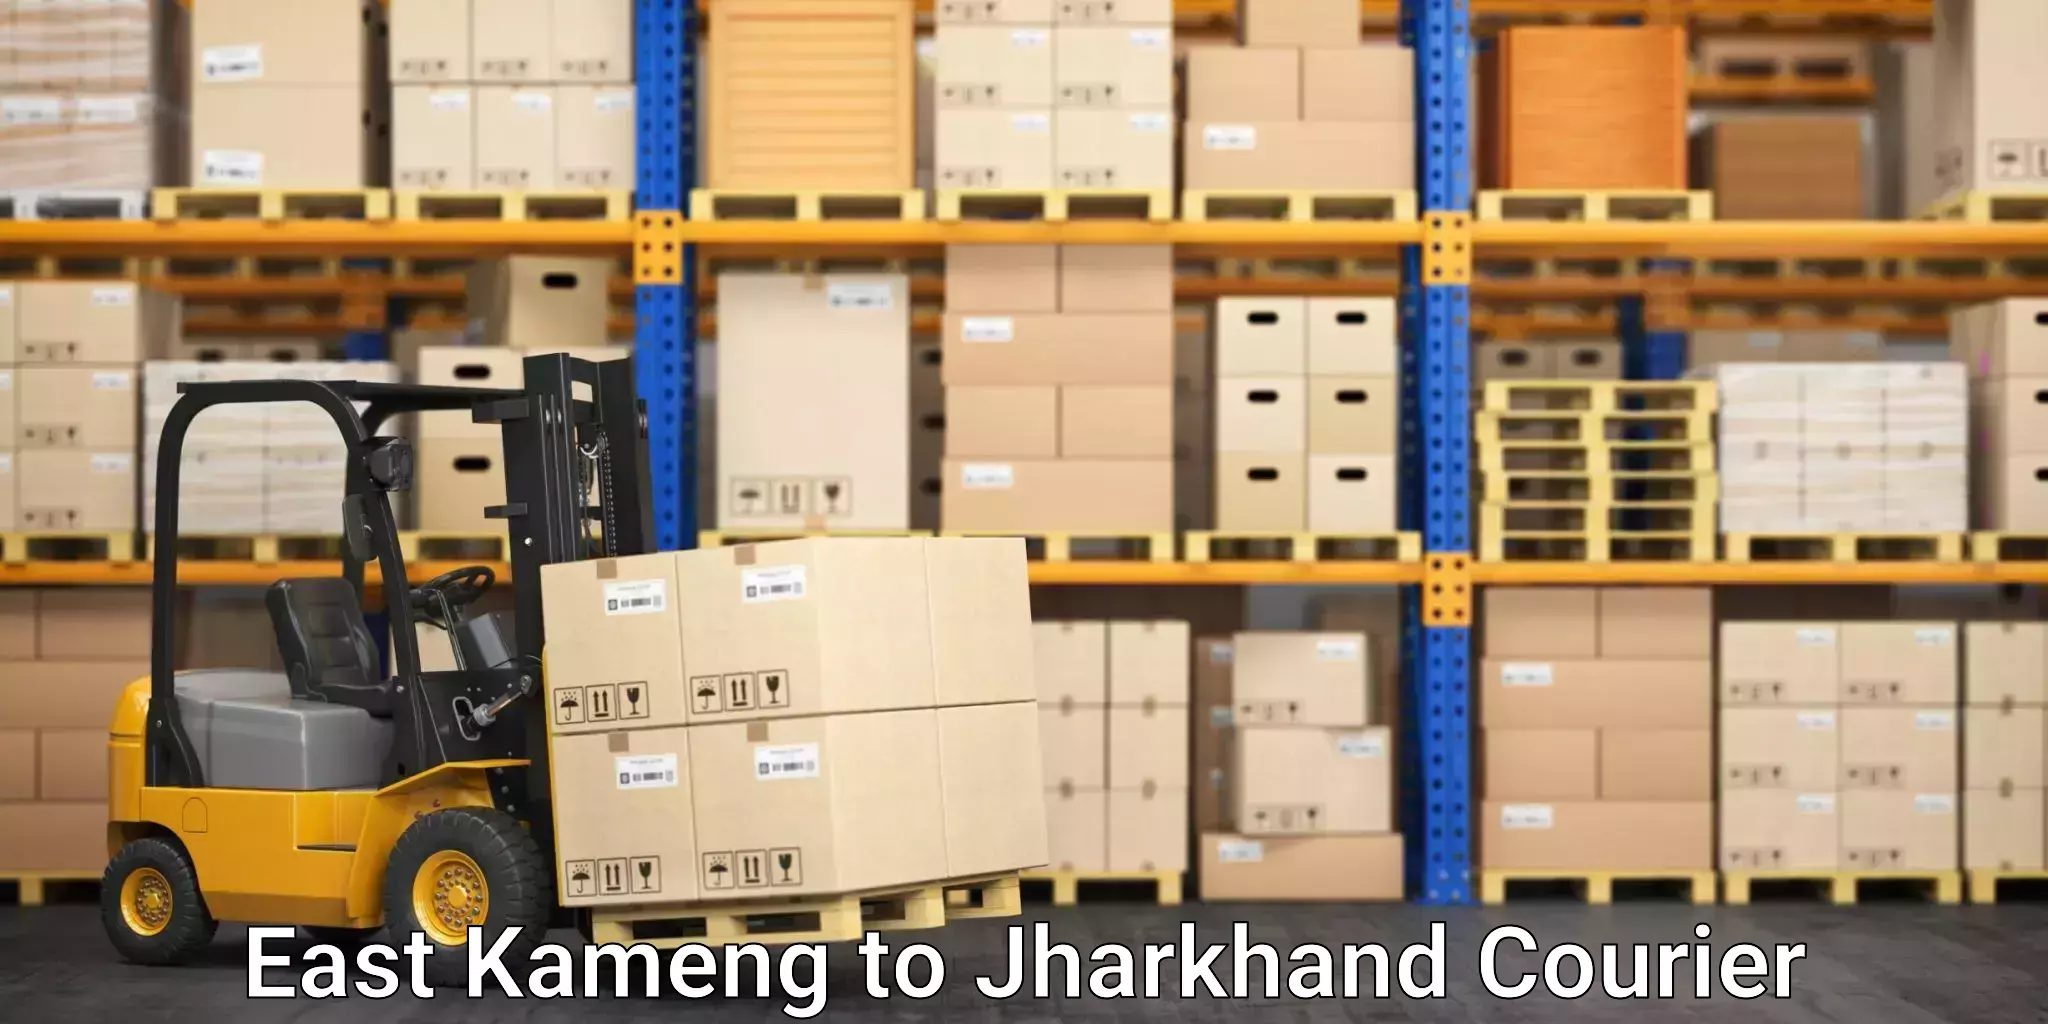 Reliable delivery network East Kameng to Jharkhand